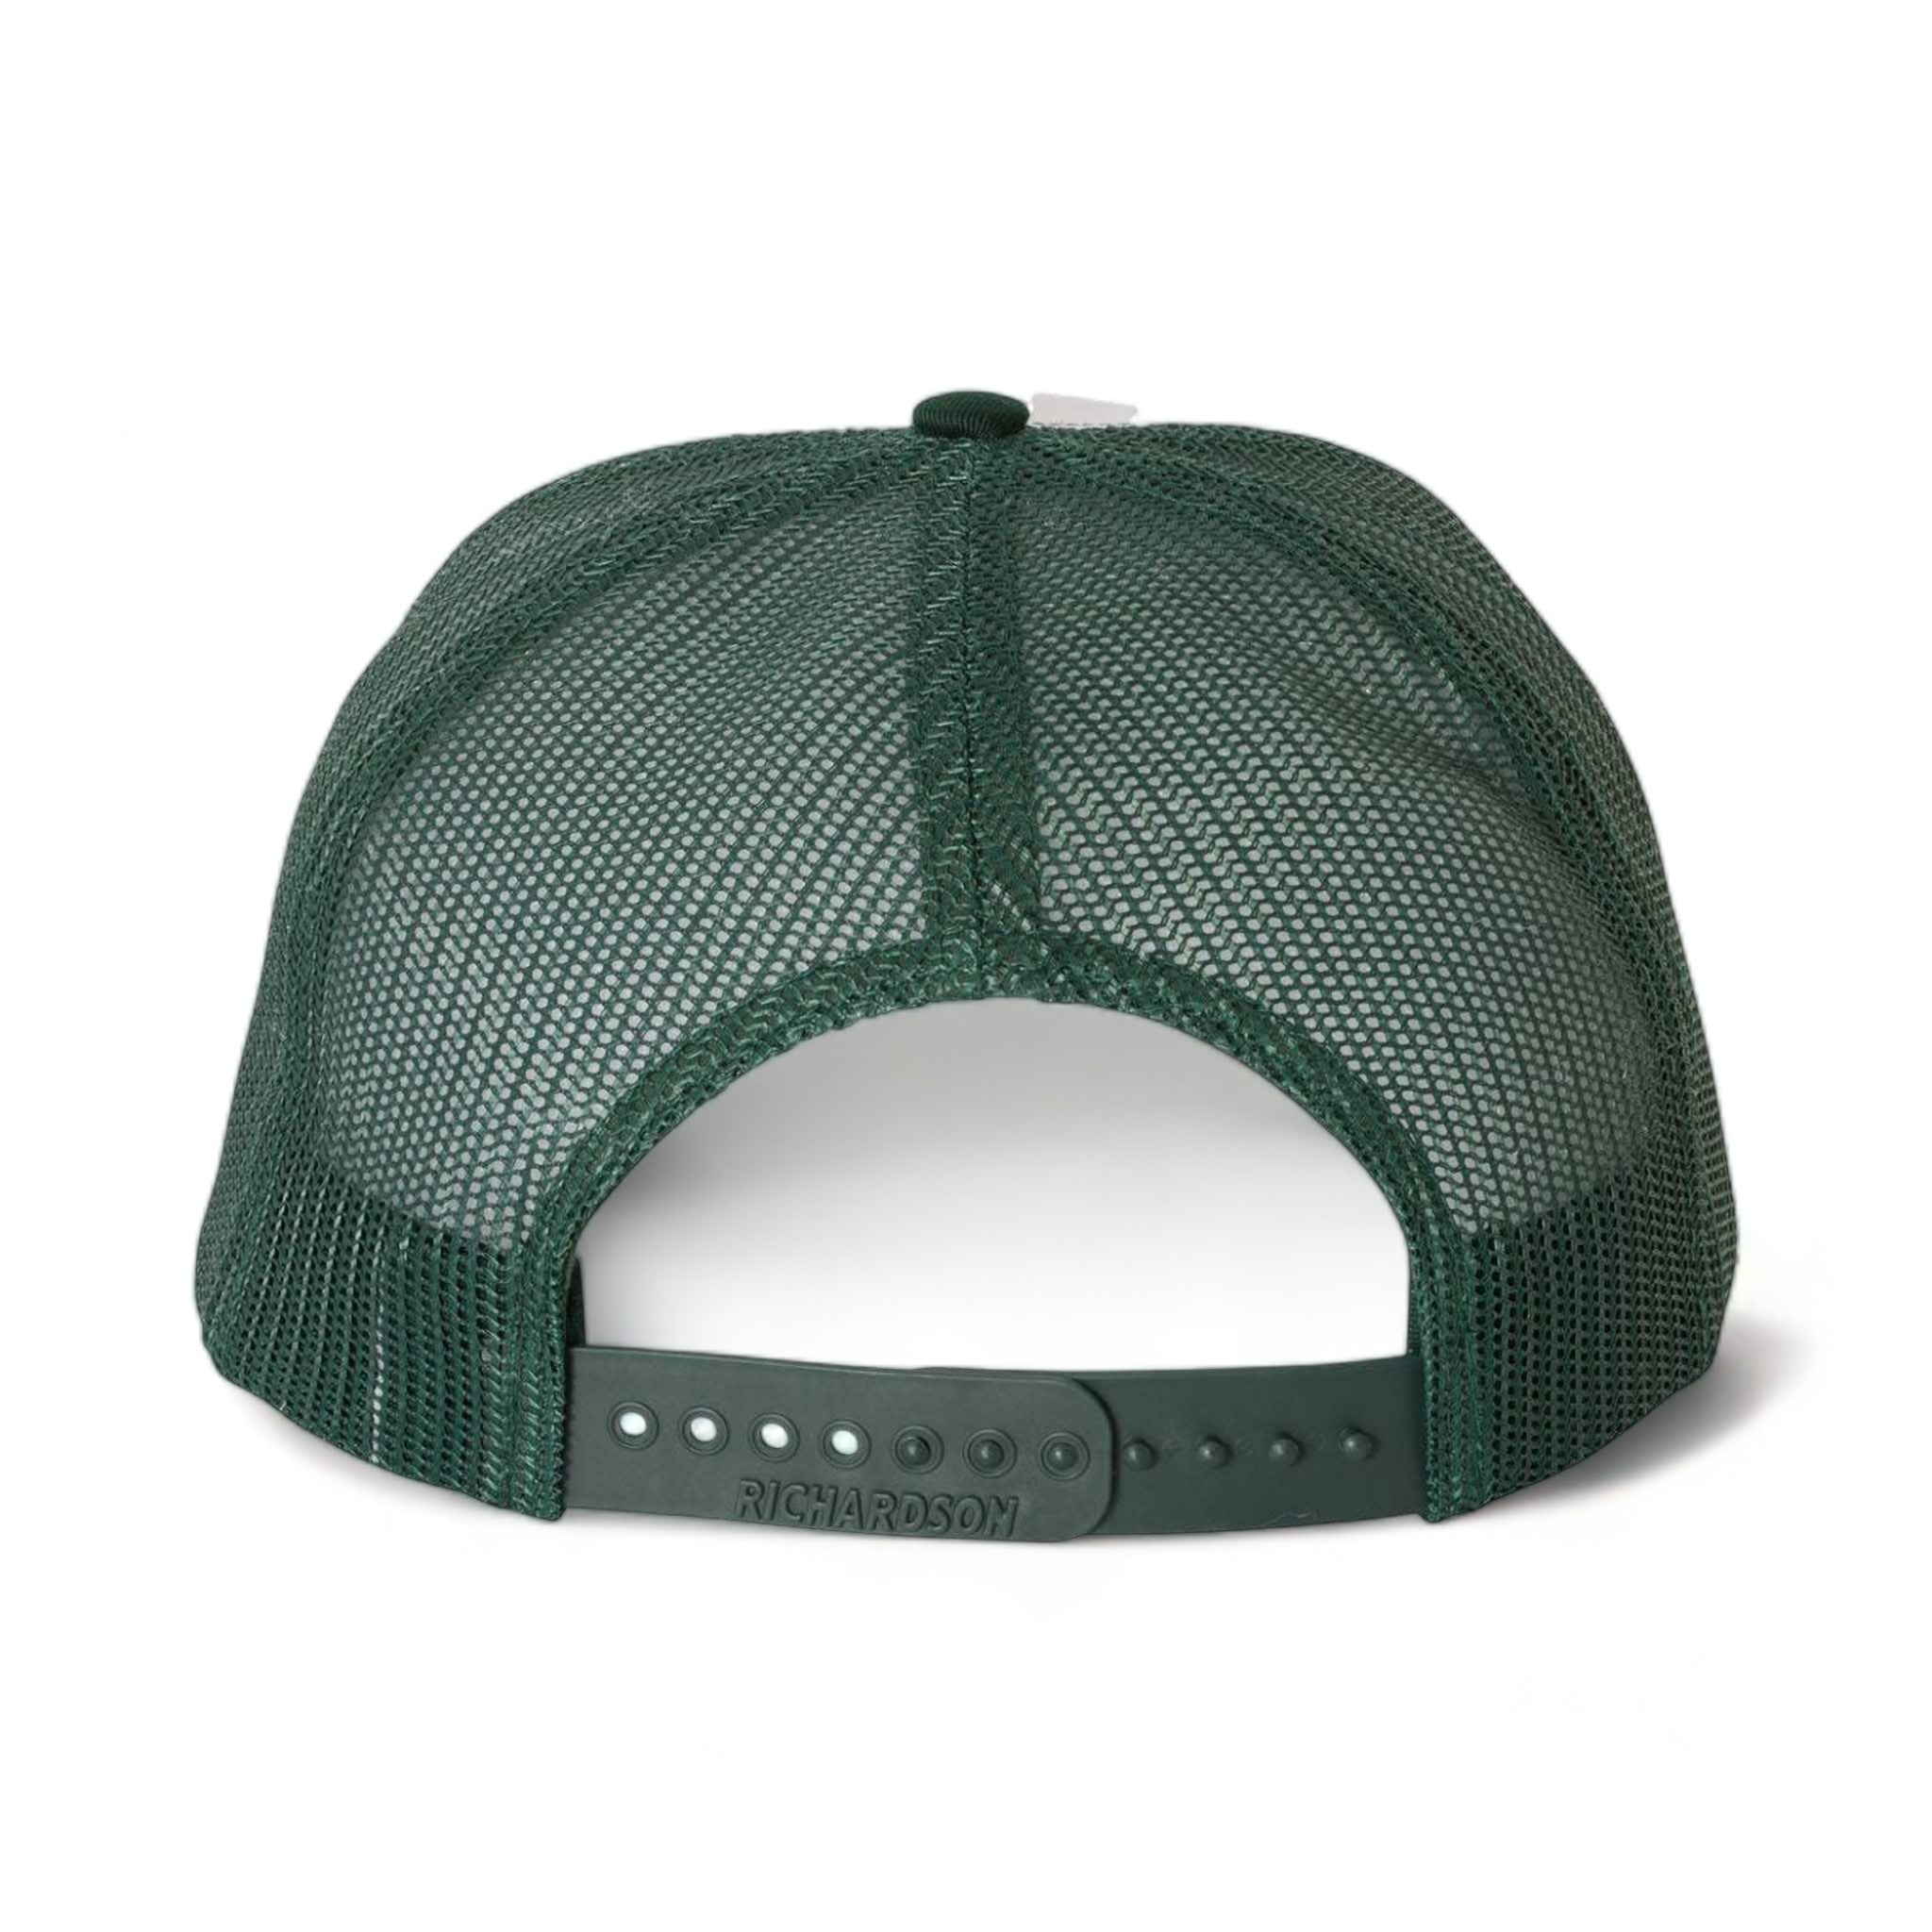 Back view of Richardson 112 custom hat in white and dark green